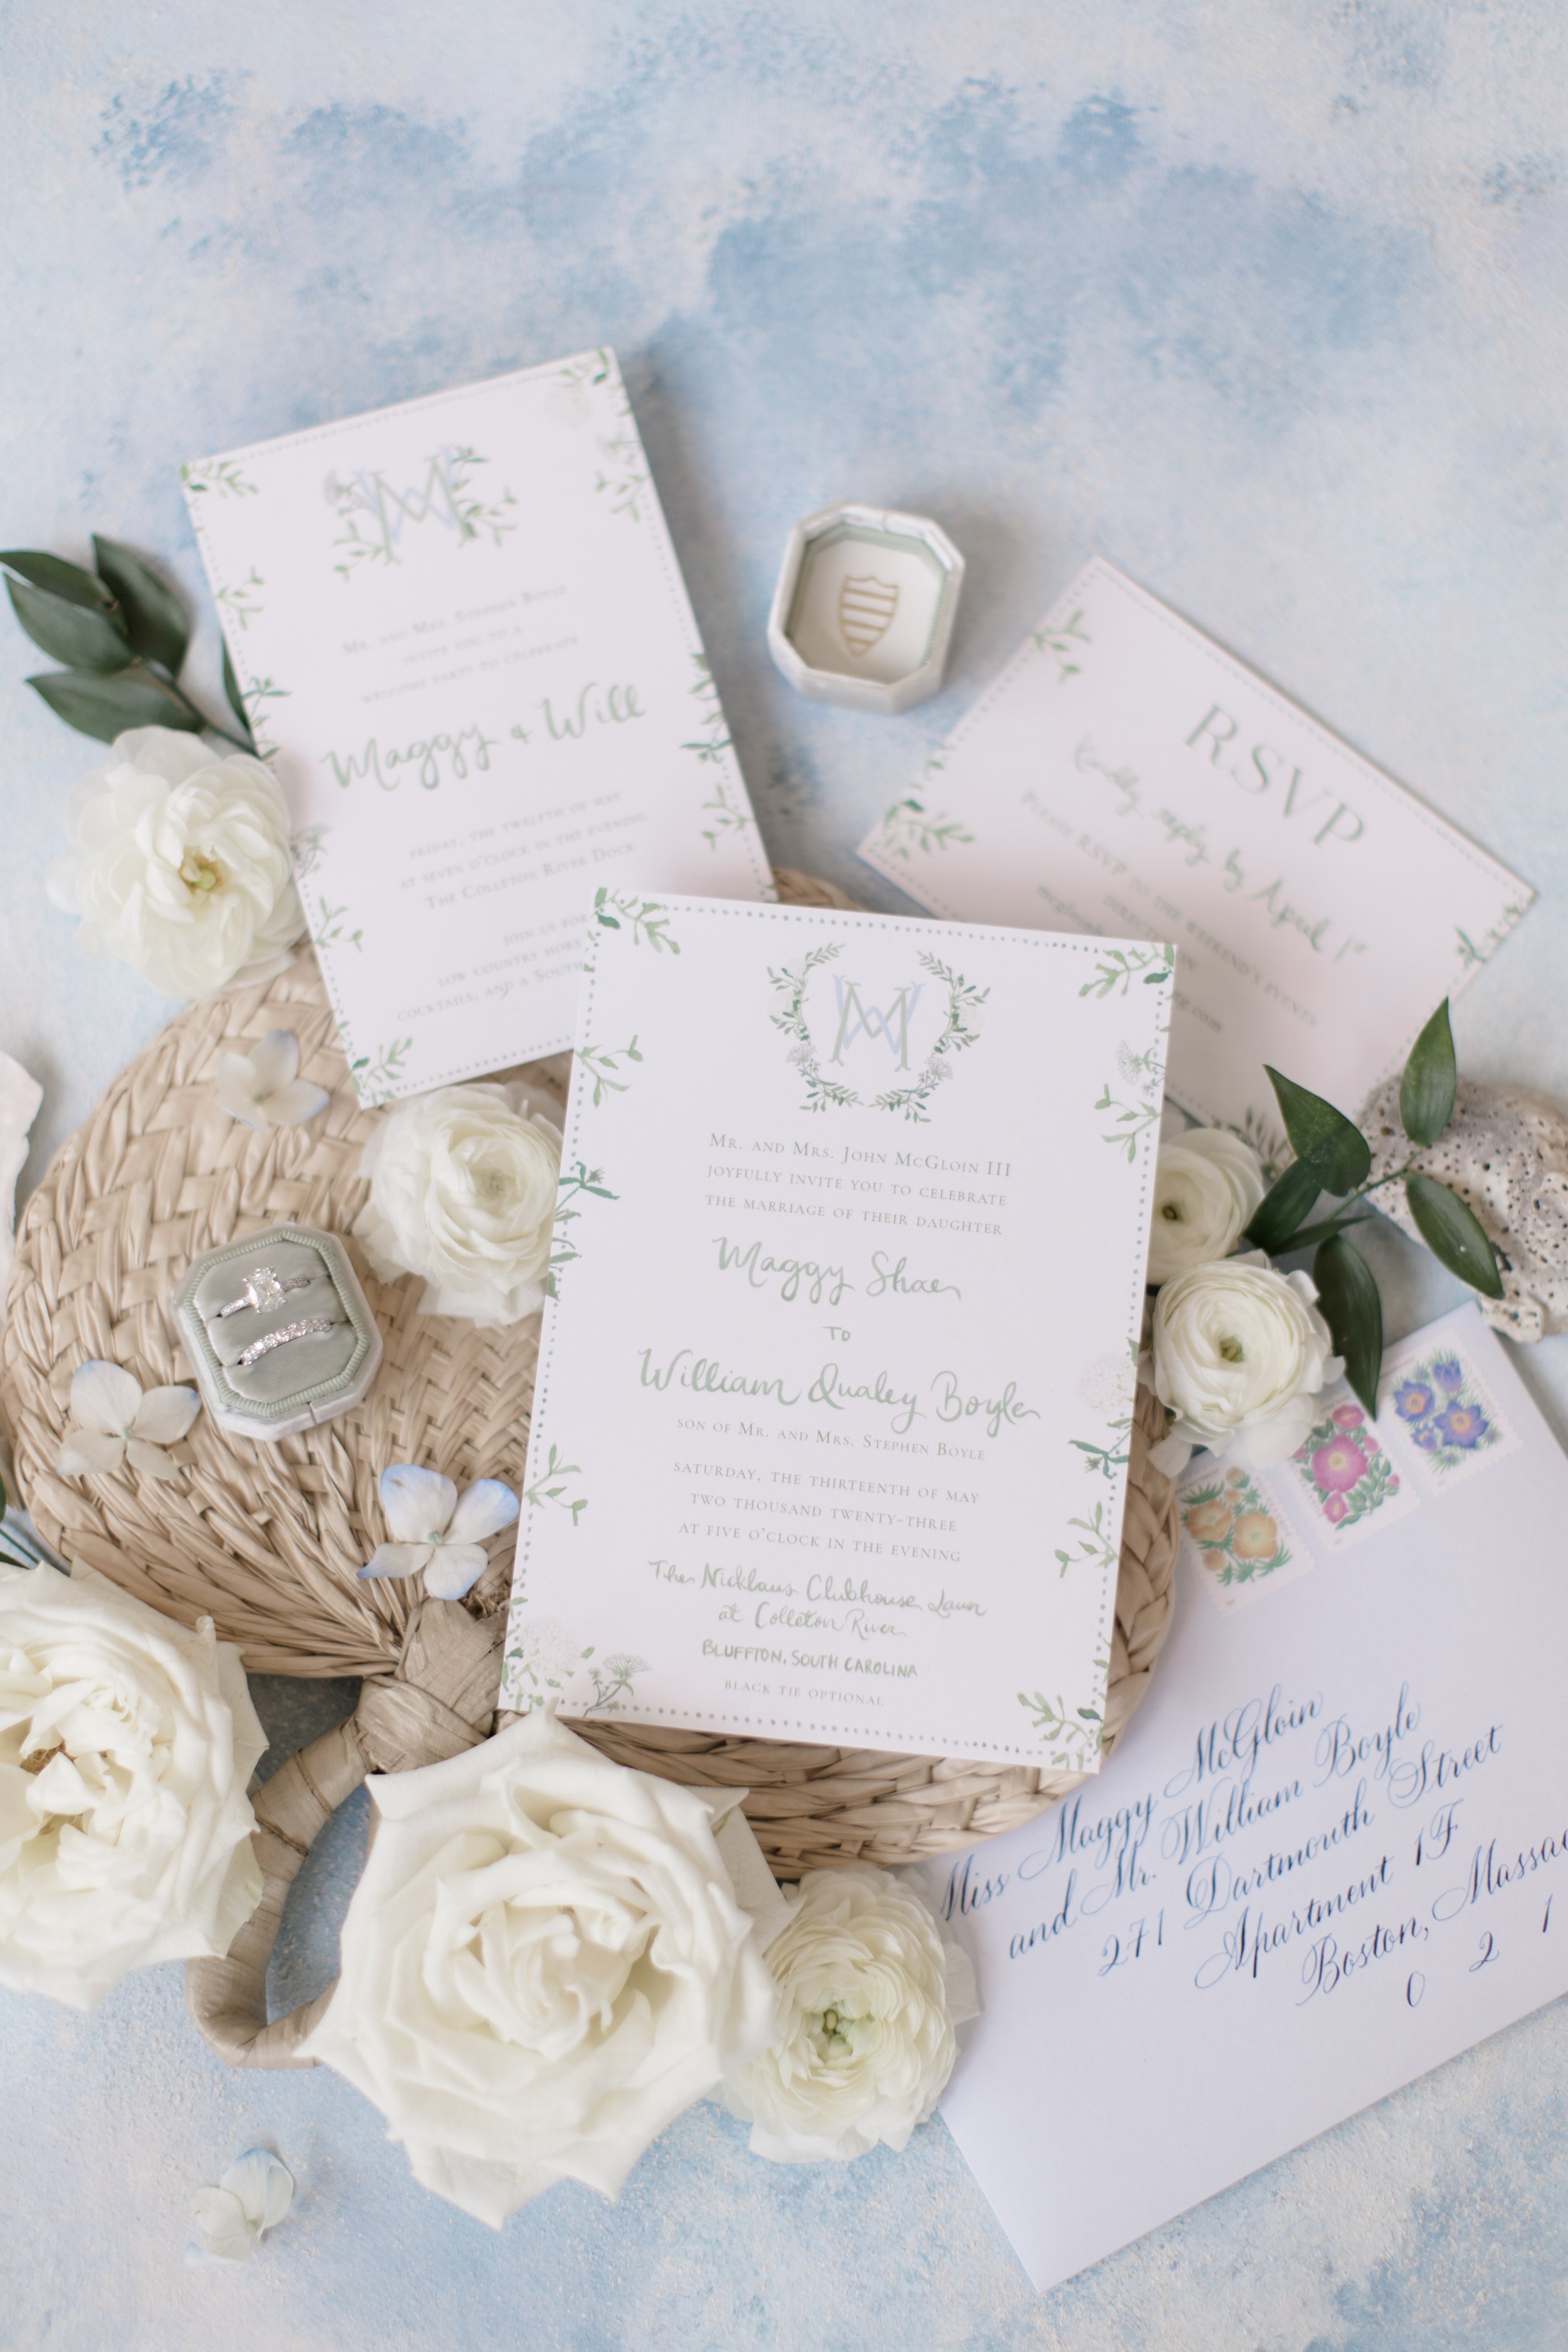 a-southern-chic-south-carolina-wedding-at-the-colleton-river-club-featuring-sophisticated-modern-florals-designed-by-savannah-florist-ivory-and-beau-1.jpg